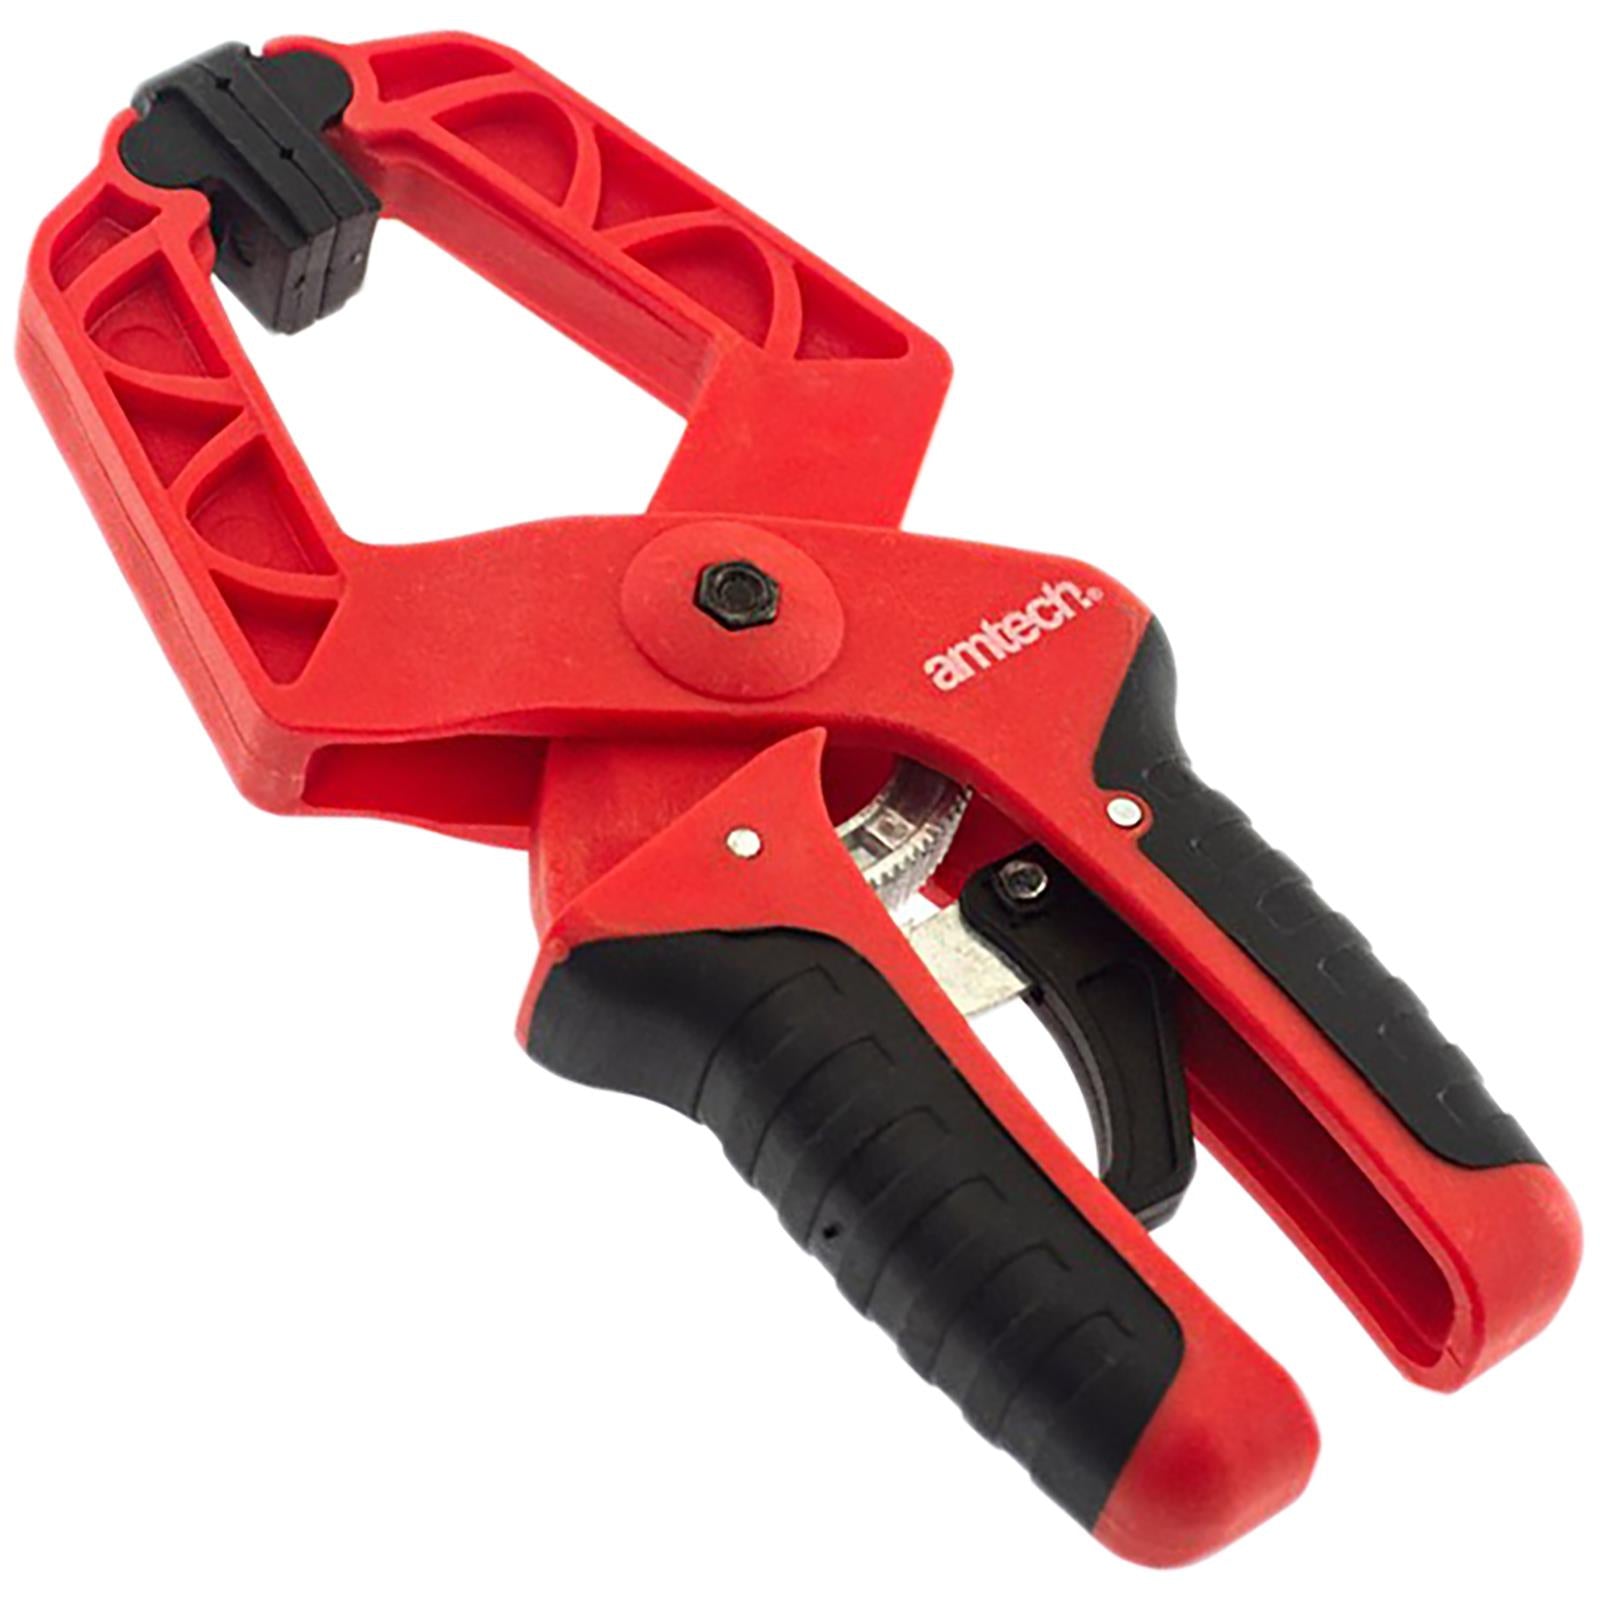 Amtech Ratchet Clamp 225mm (9") with Soft Grip Handle